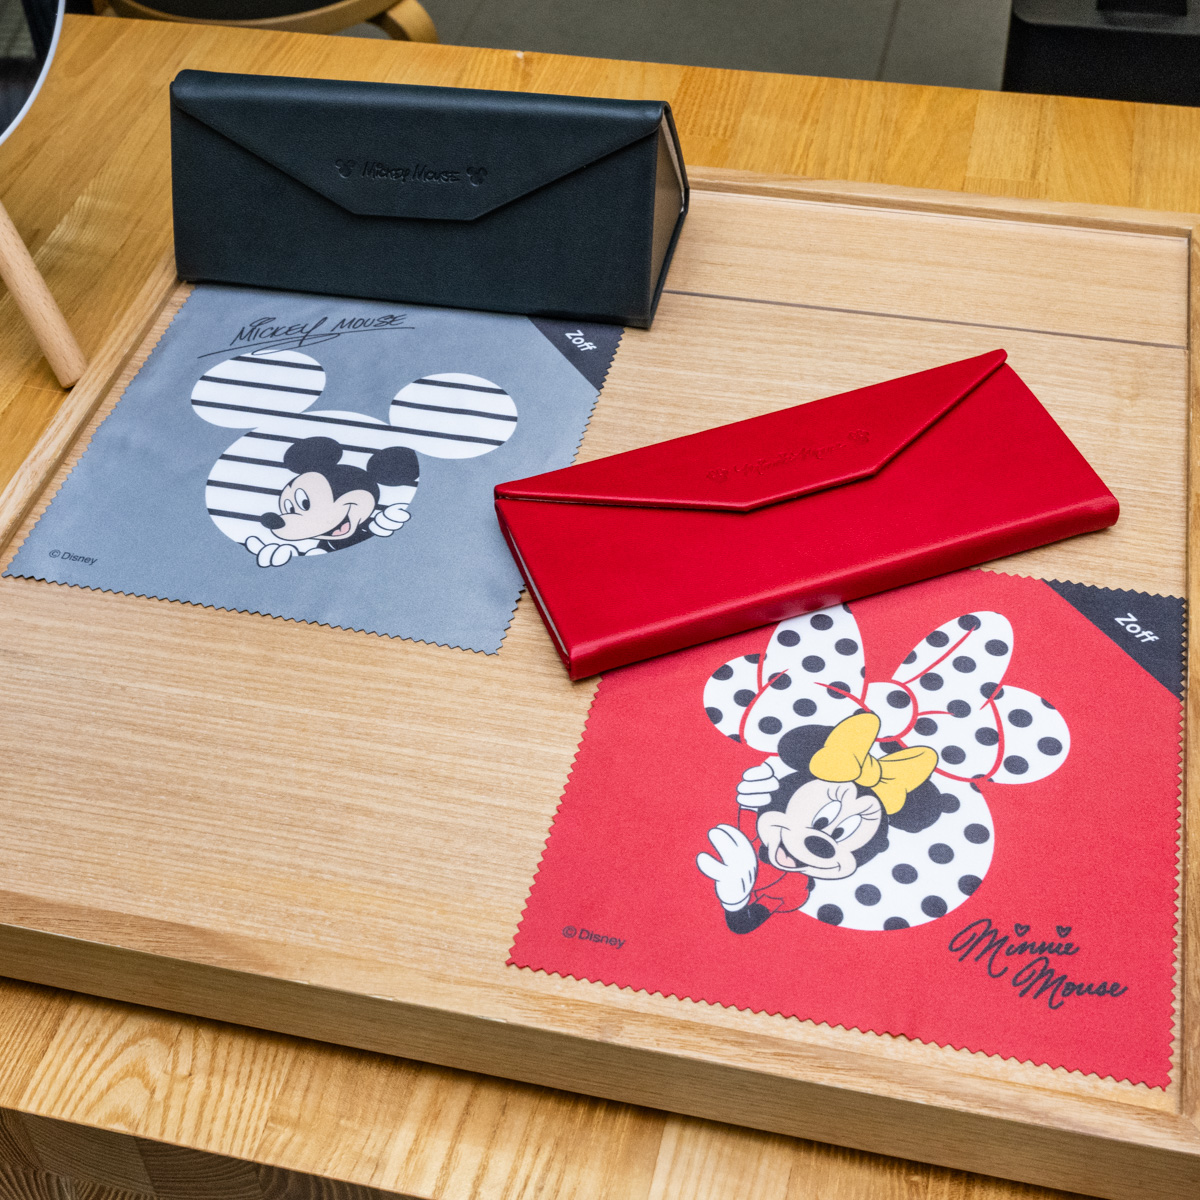 「Disney Collection created by Zoff “＆YOU”」付属品